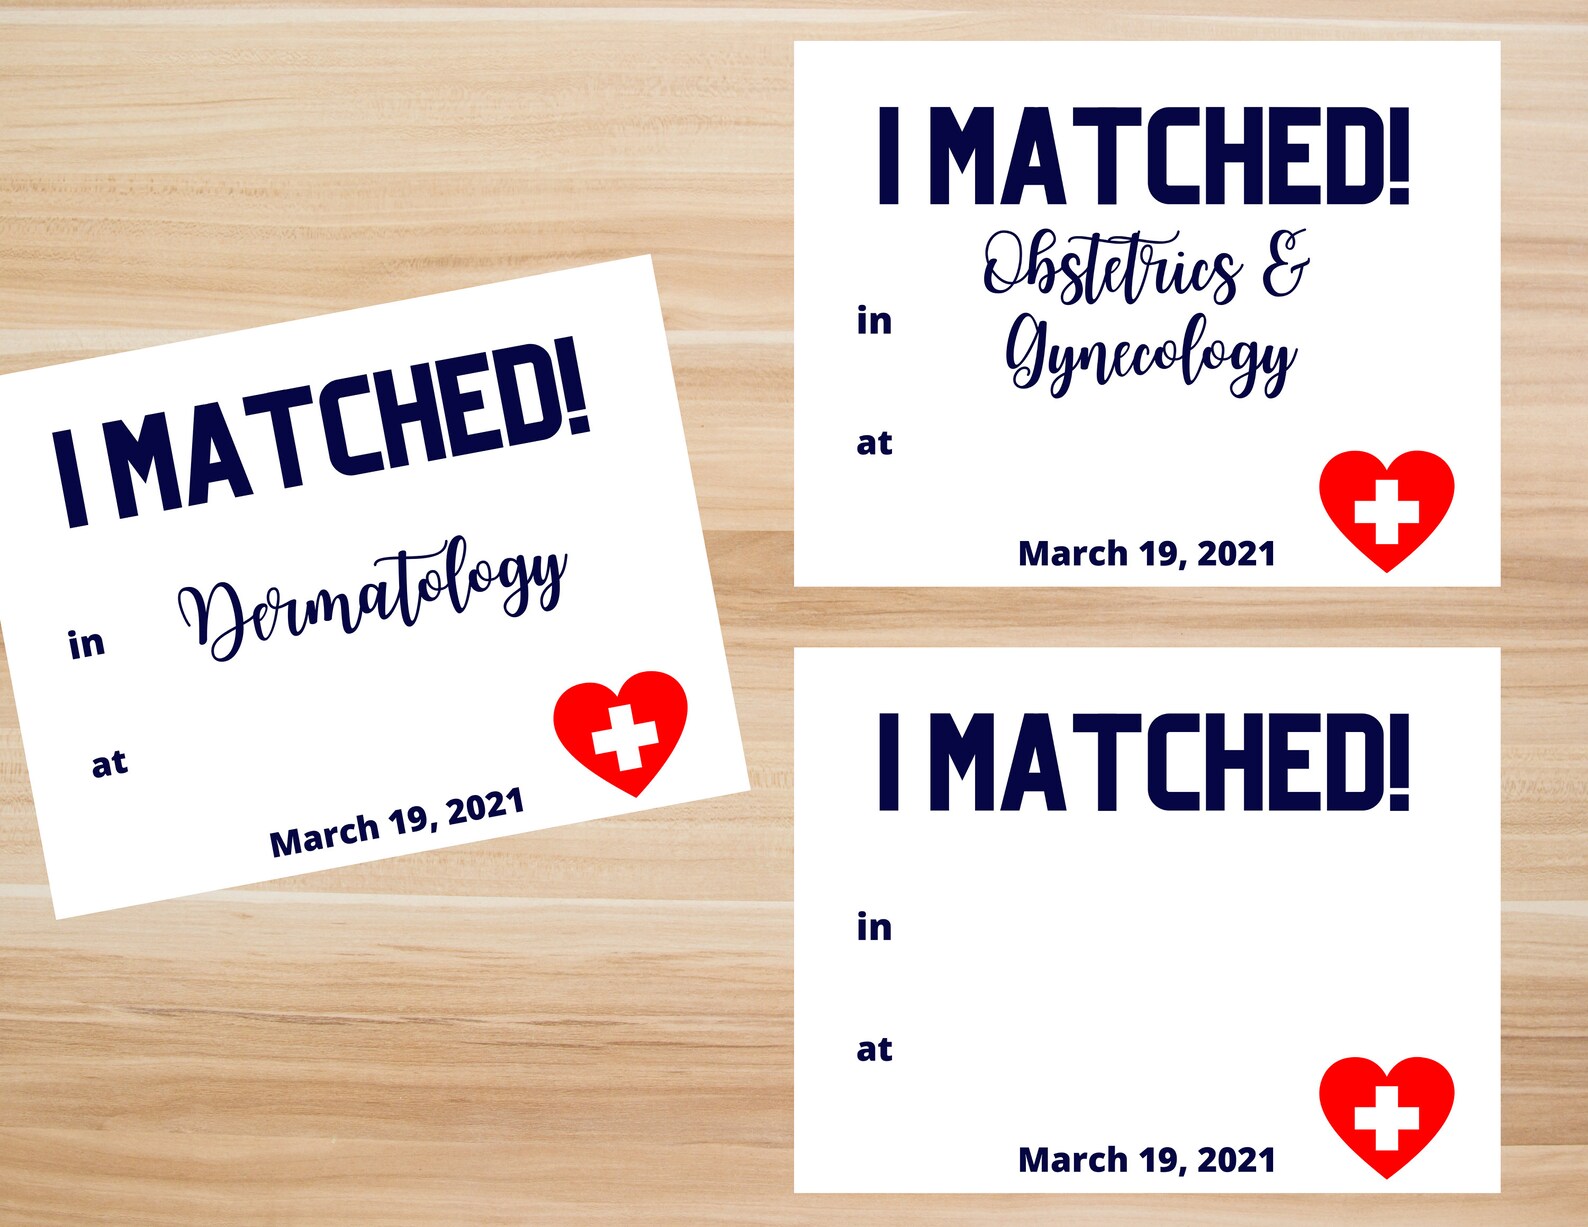 Residency Match Day Signs 8.5x11 Printable Signs Virtual